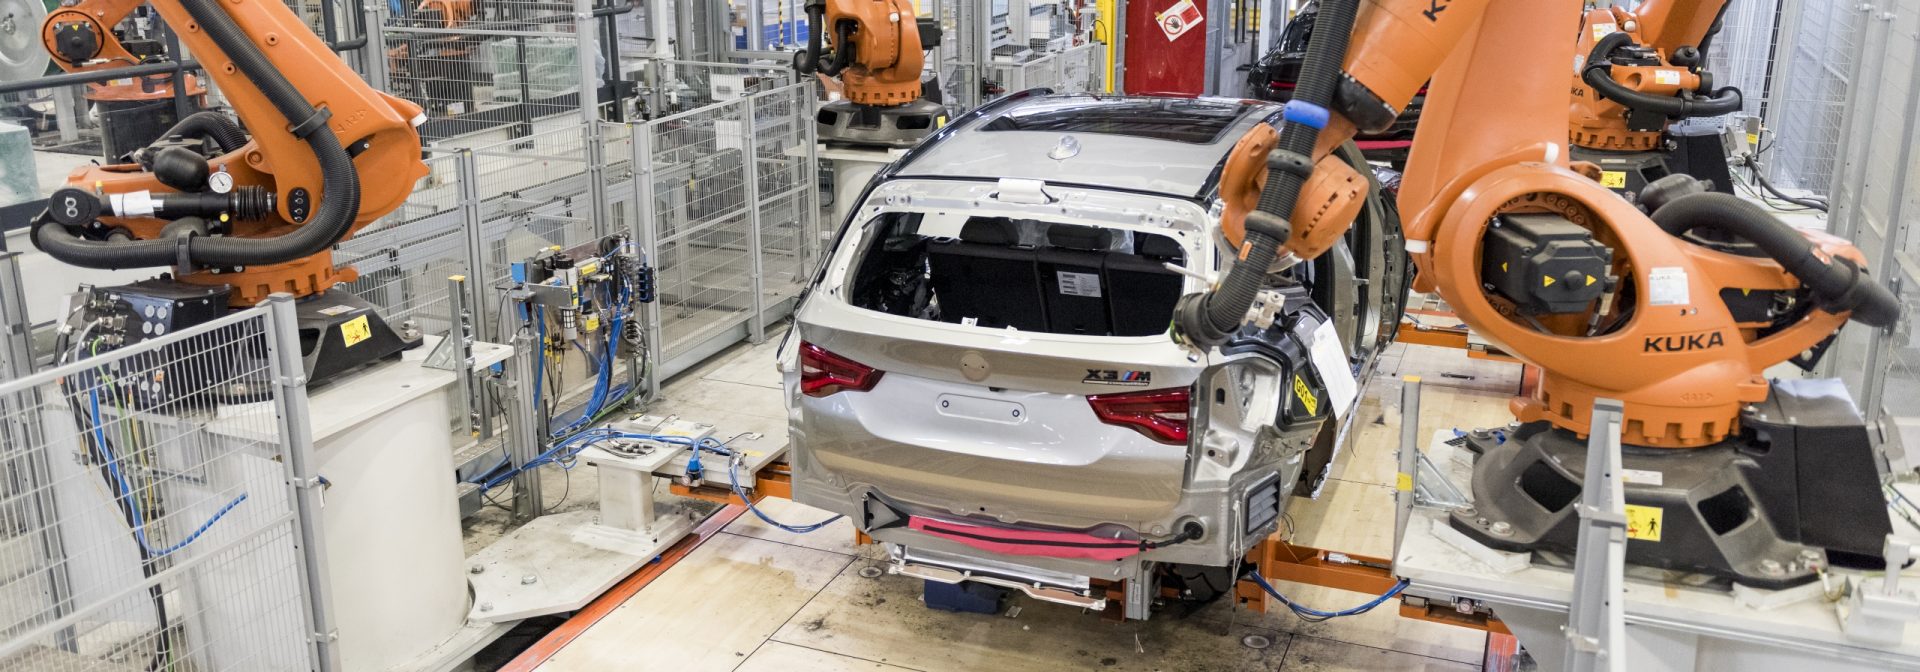 Assembly of the first BMW X3 M begins at Plant Spartanburg. It is shown in the body shop surrounded by Kuka robots. 